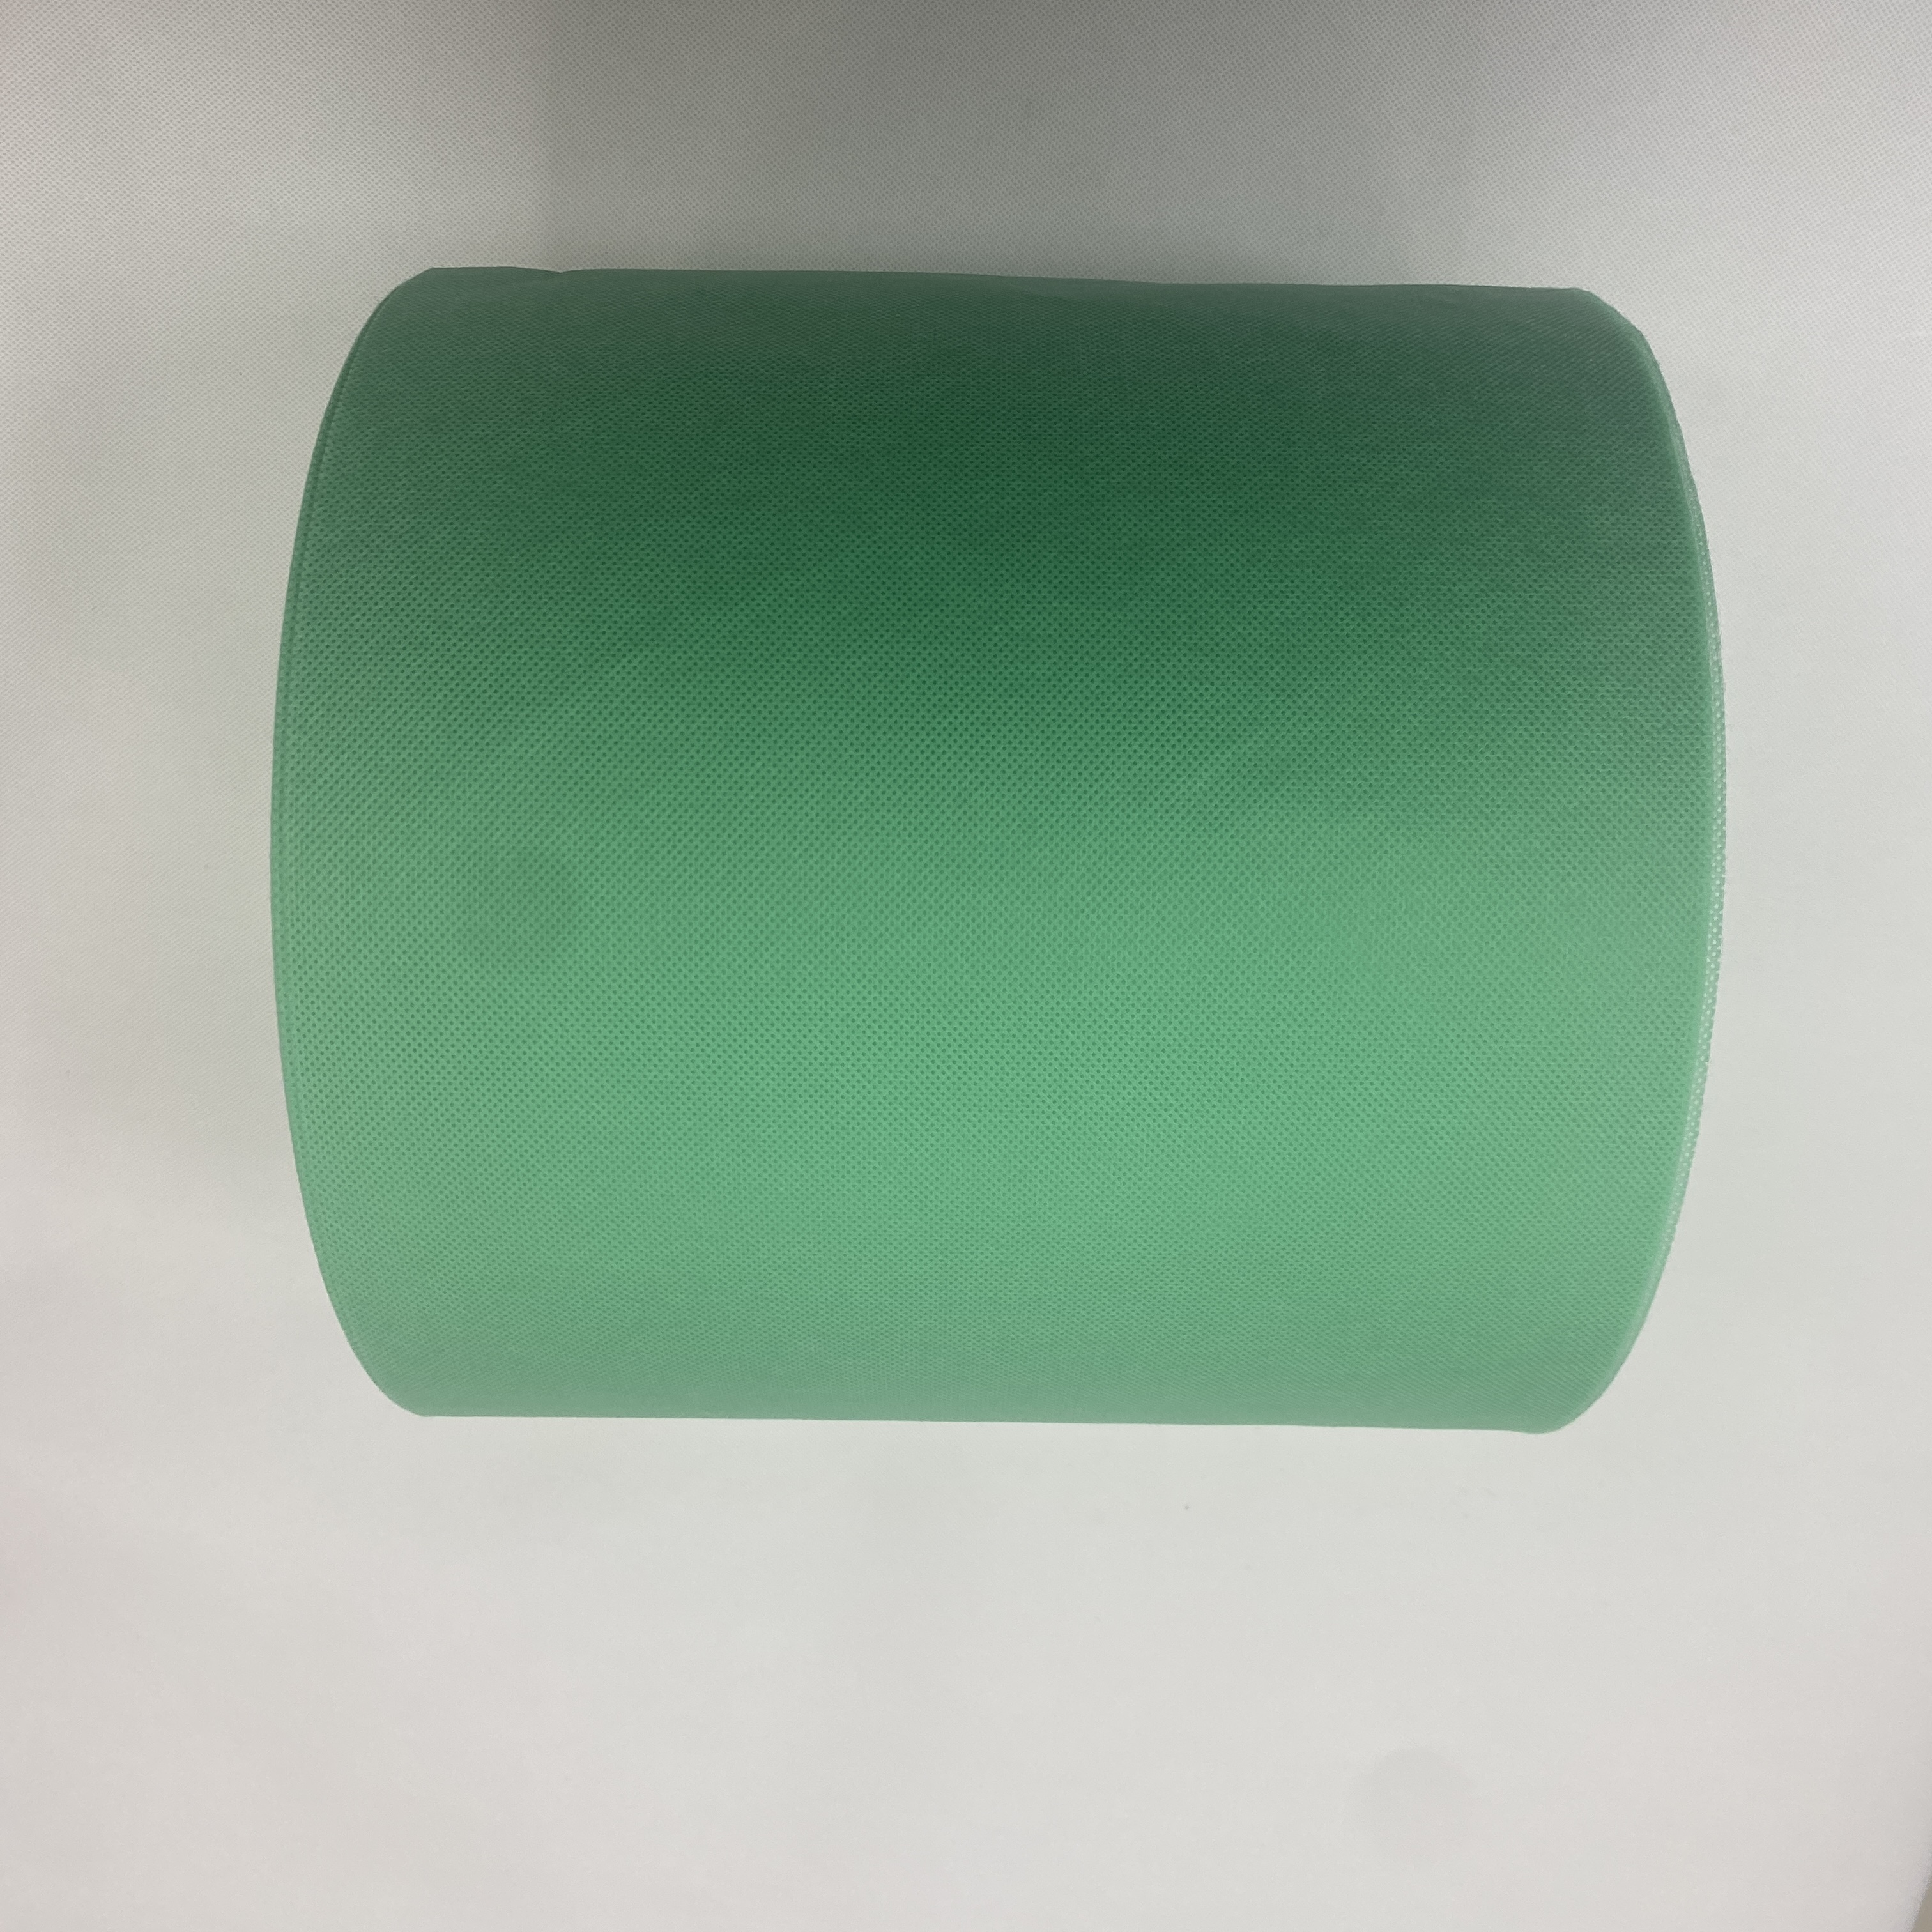 25gsm PP Non woven Fabric Material for Medical of Face Covering Spunbond SS/SSS Protecting